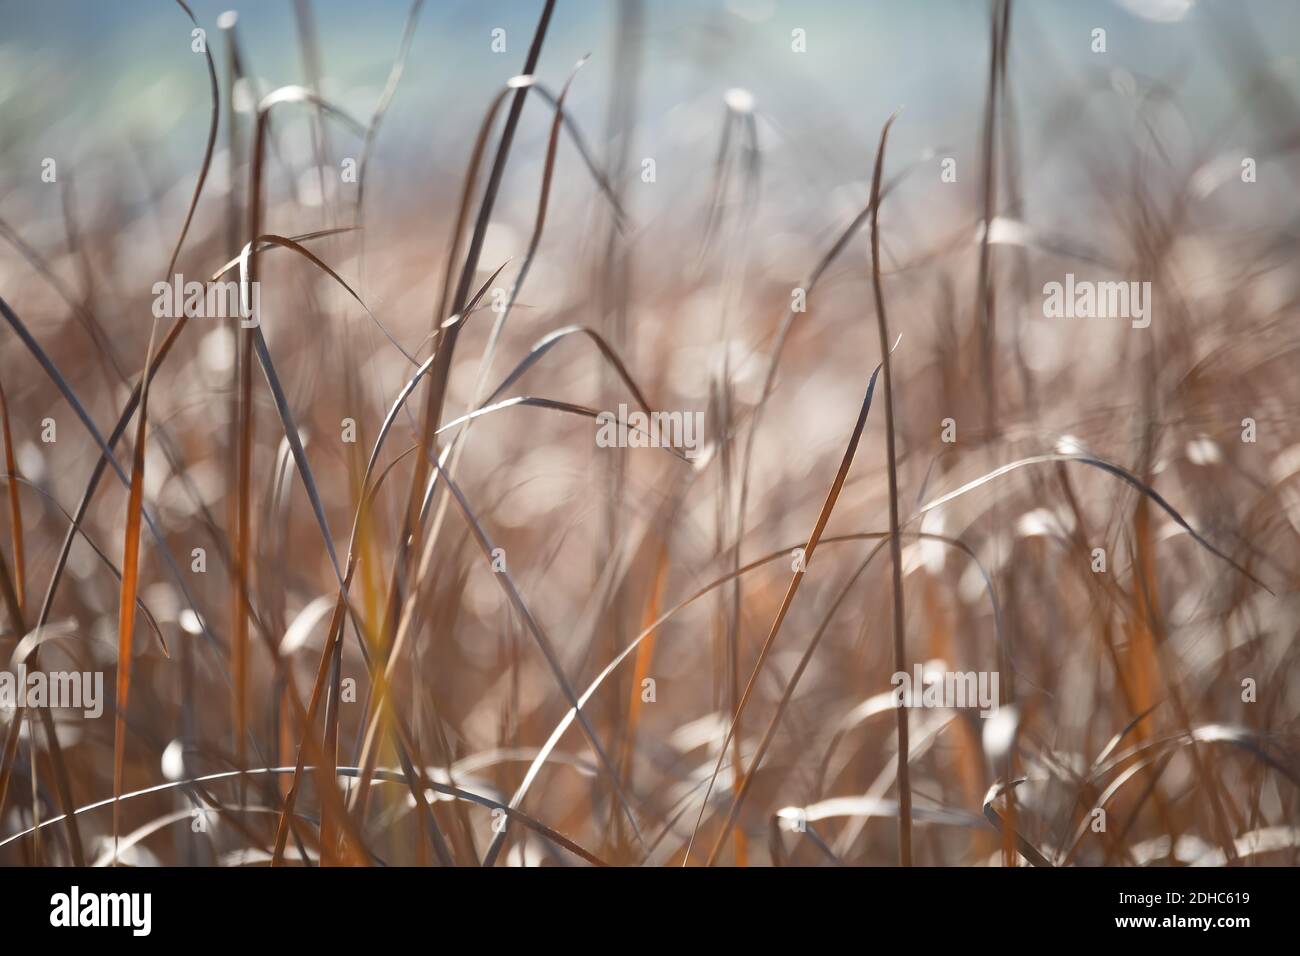 Orange reeds blowing in the wind. Stock Photo